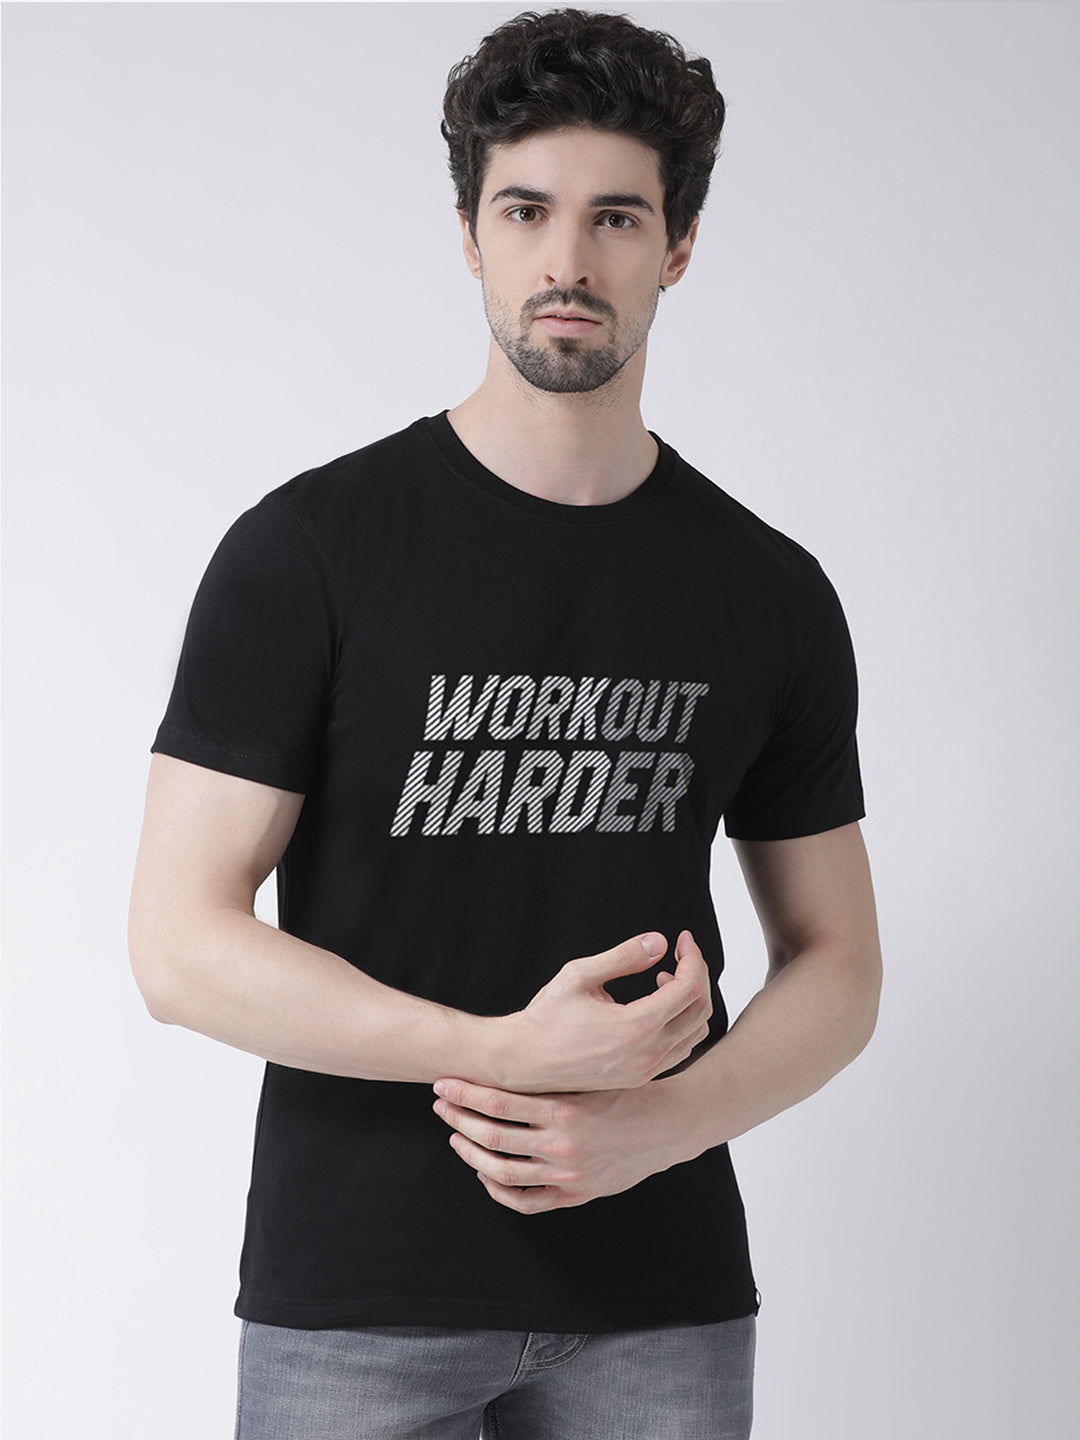 Workout harder Printed Clearence Round Neck T-shirt - Friskers